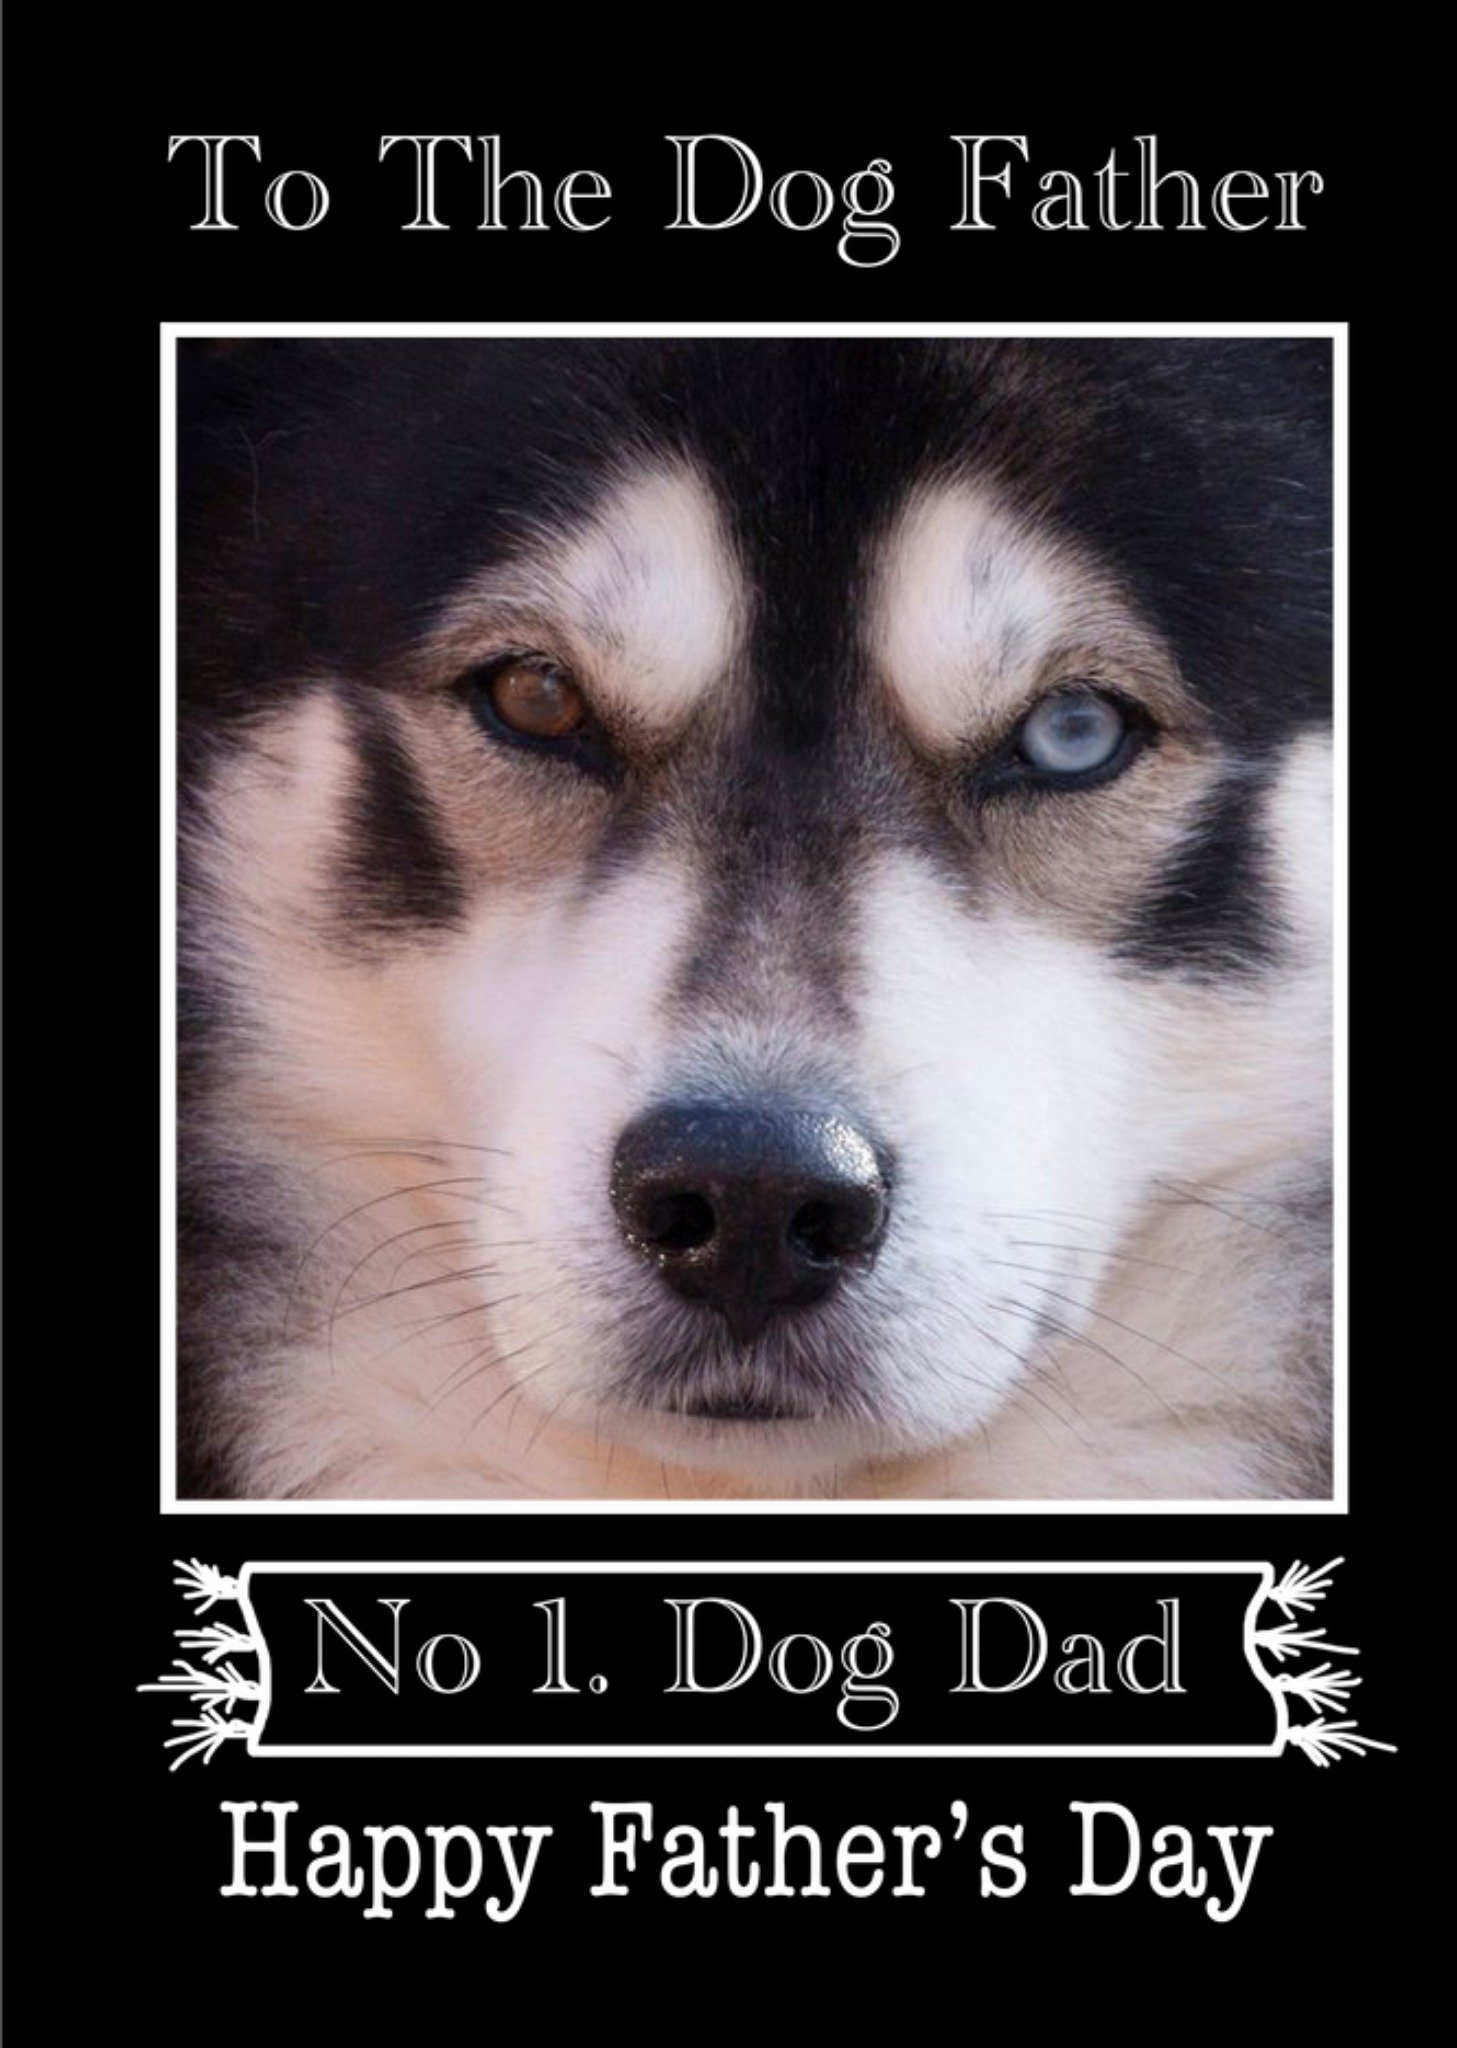 Moonpig Photo Of A Husky To The Dog Father No 1 Dog Dad Photo Upload Father's Day Card, Large